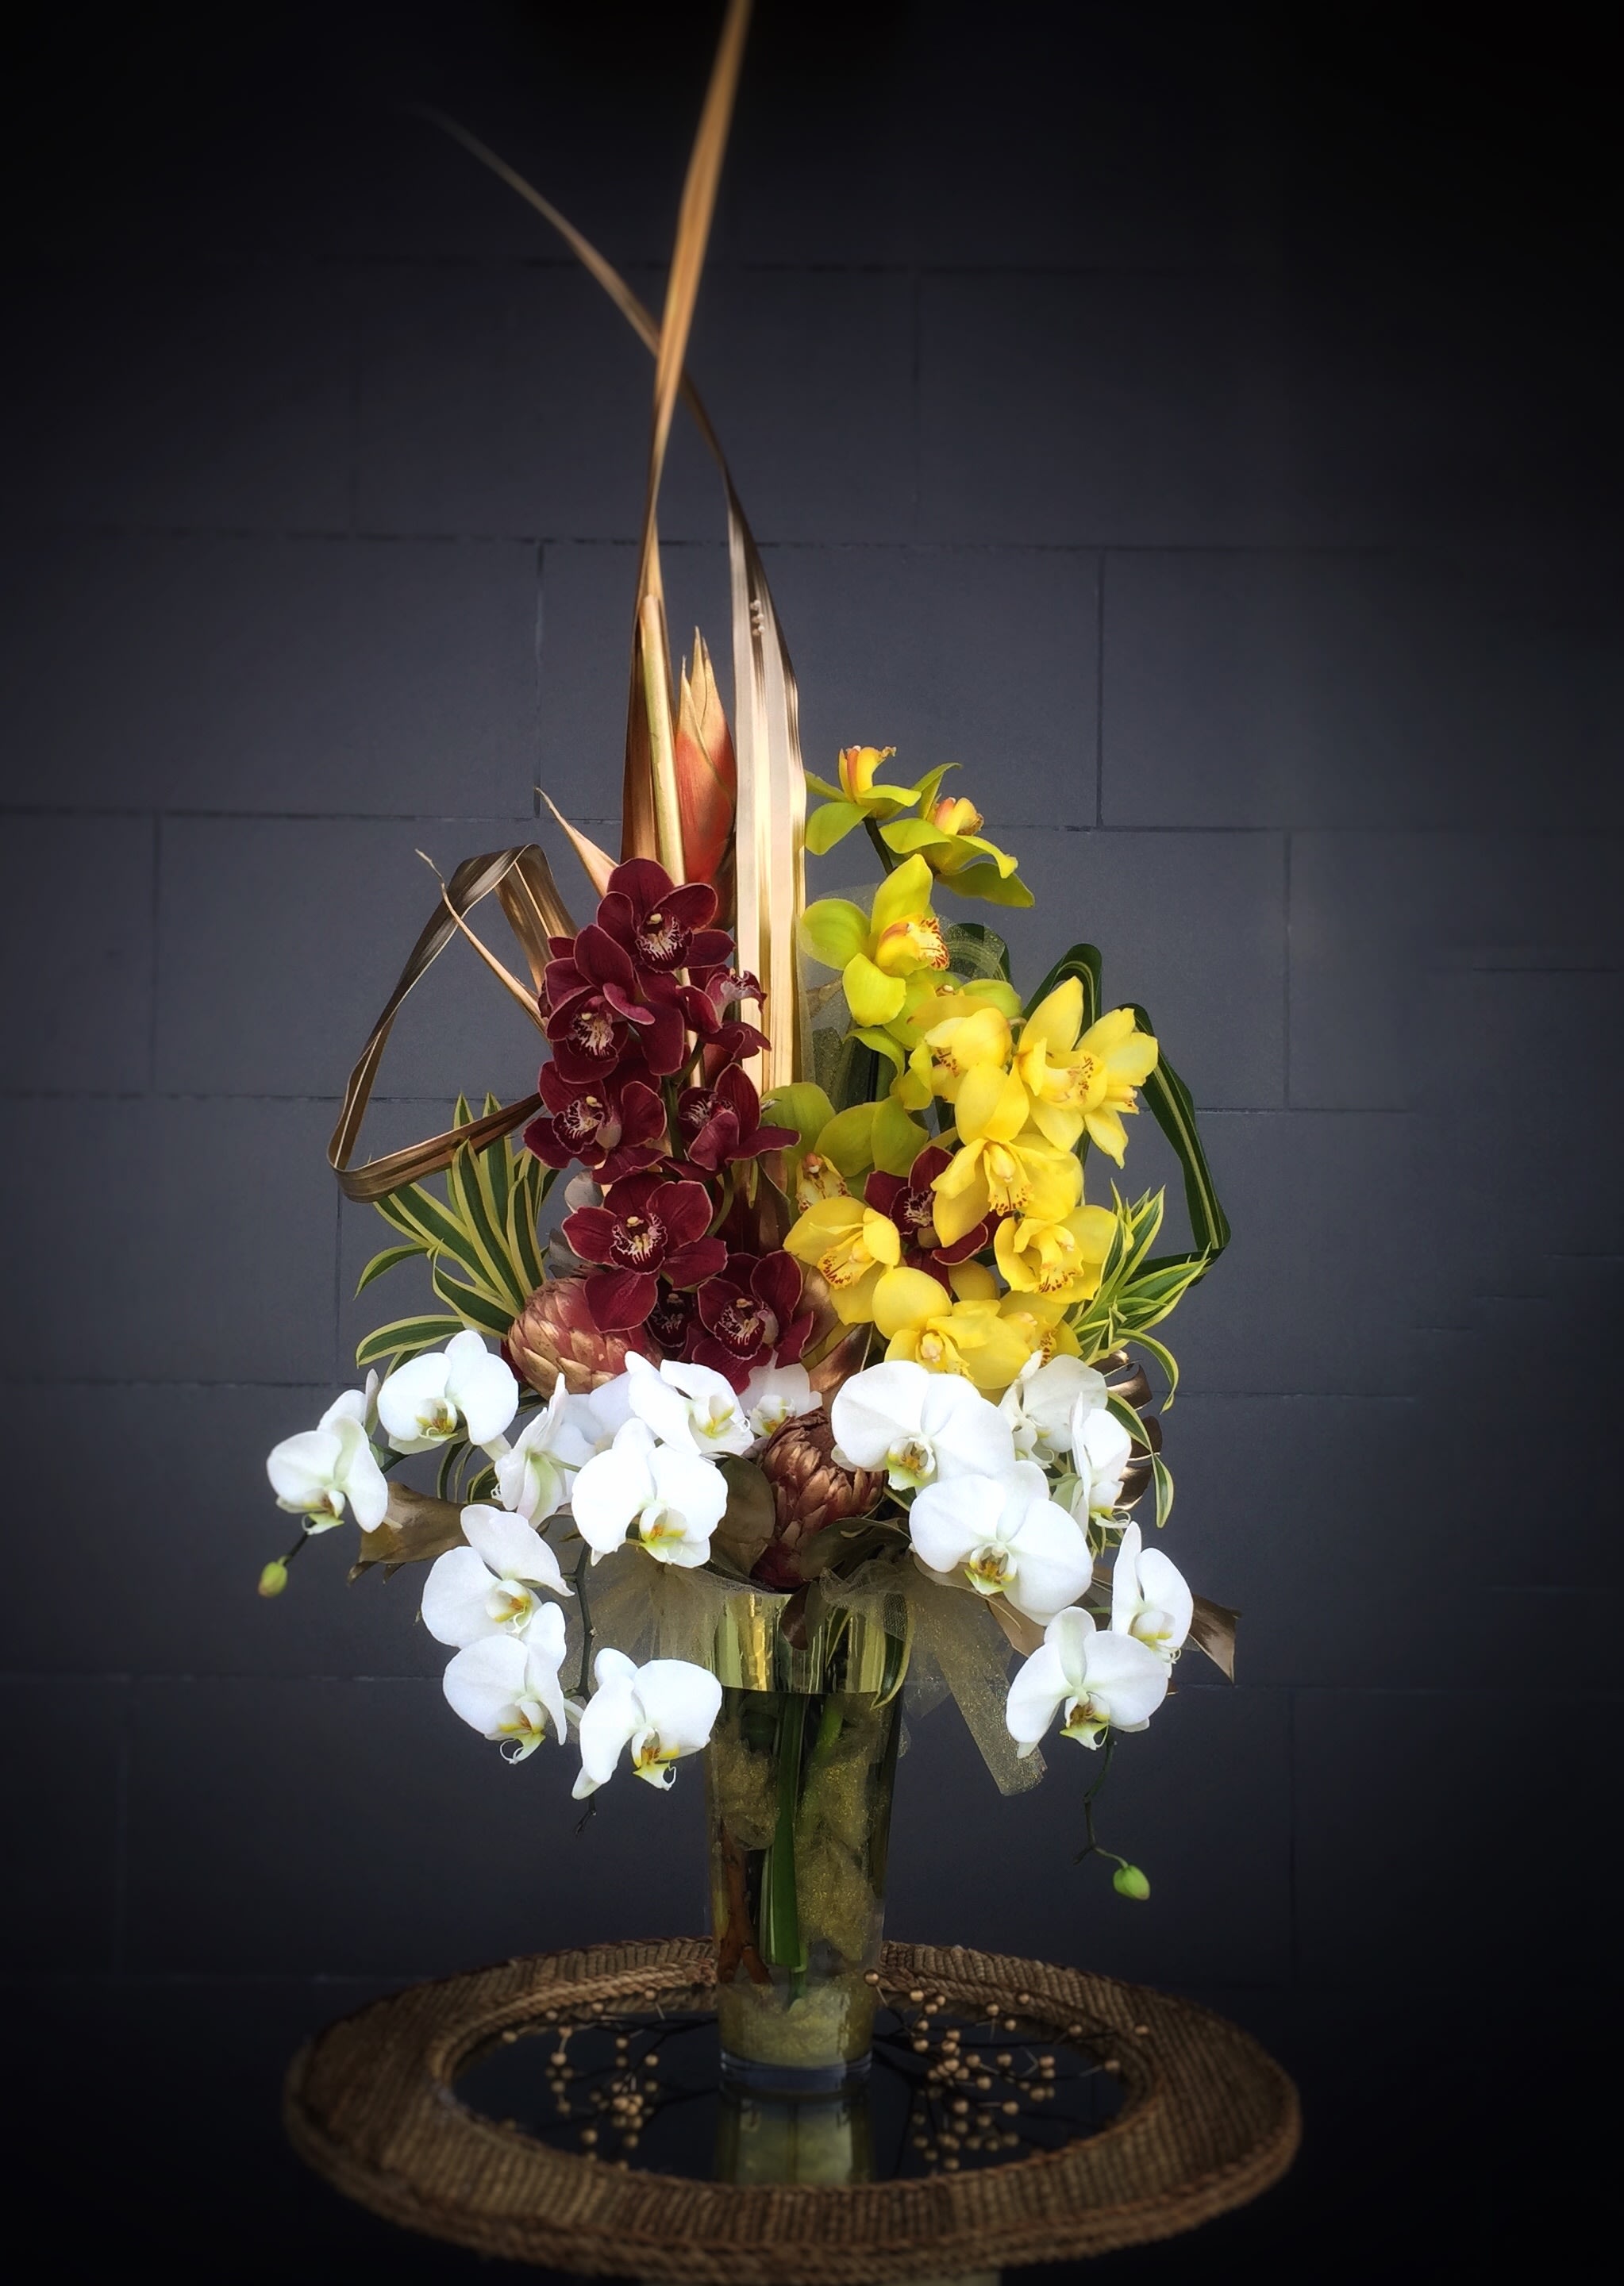 Magnificence - Luxury design including Cymbidium orchids, Phalaenopsis orchids and tropical accents in a  gold vase.